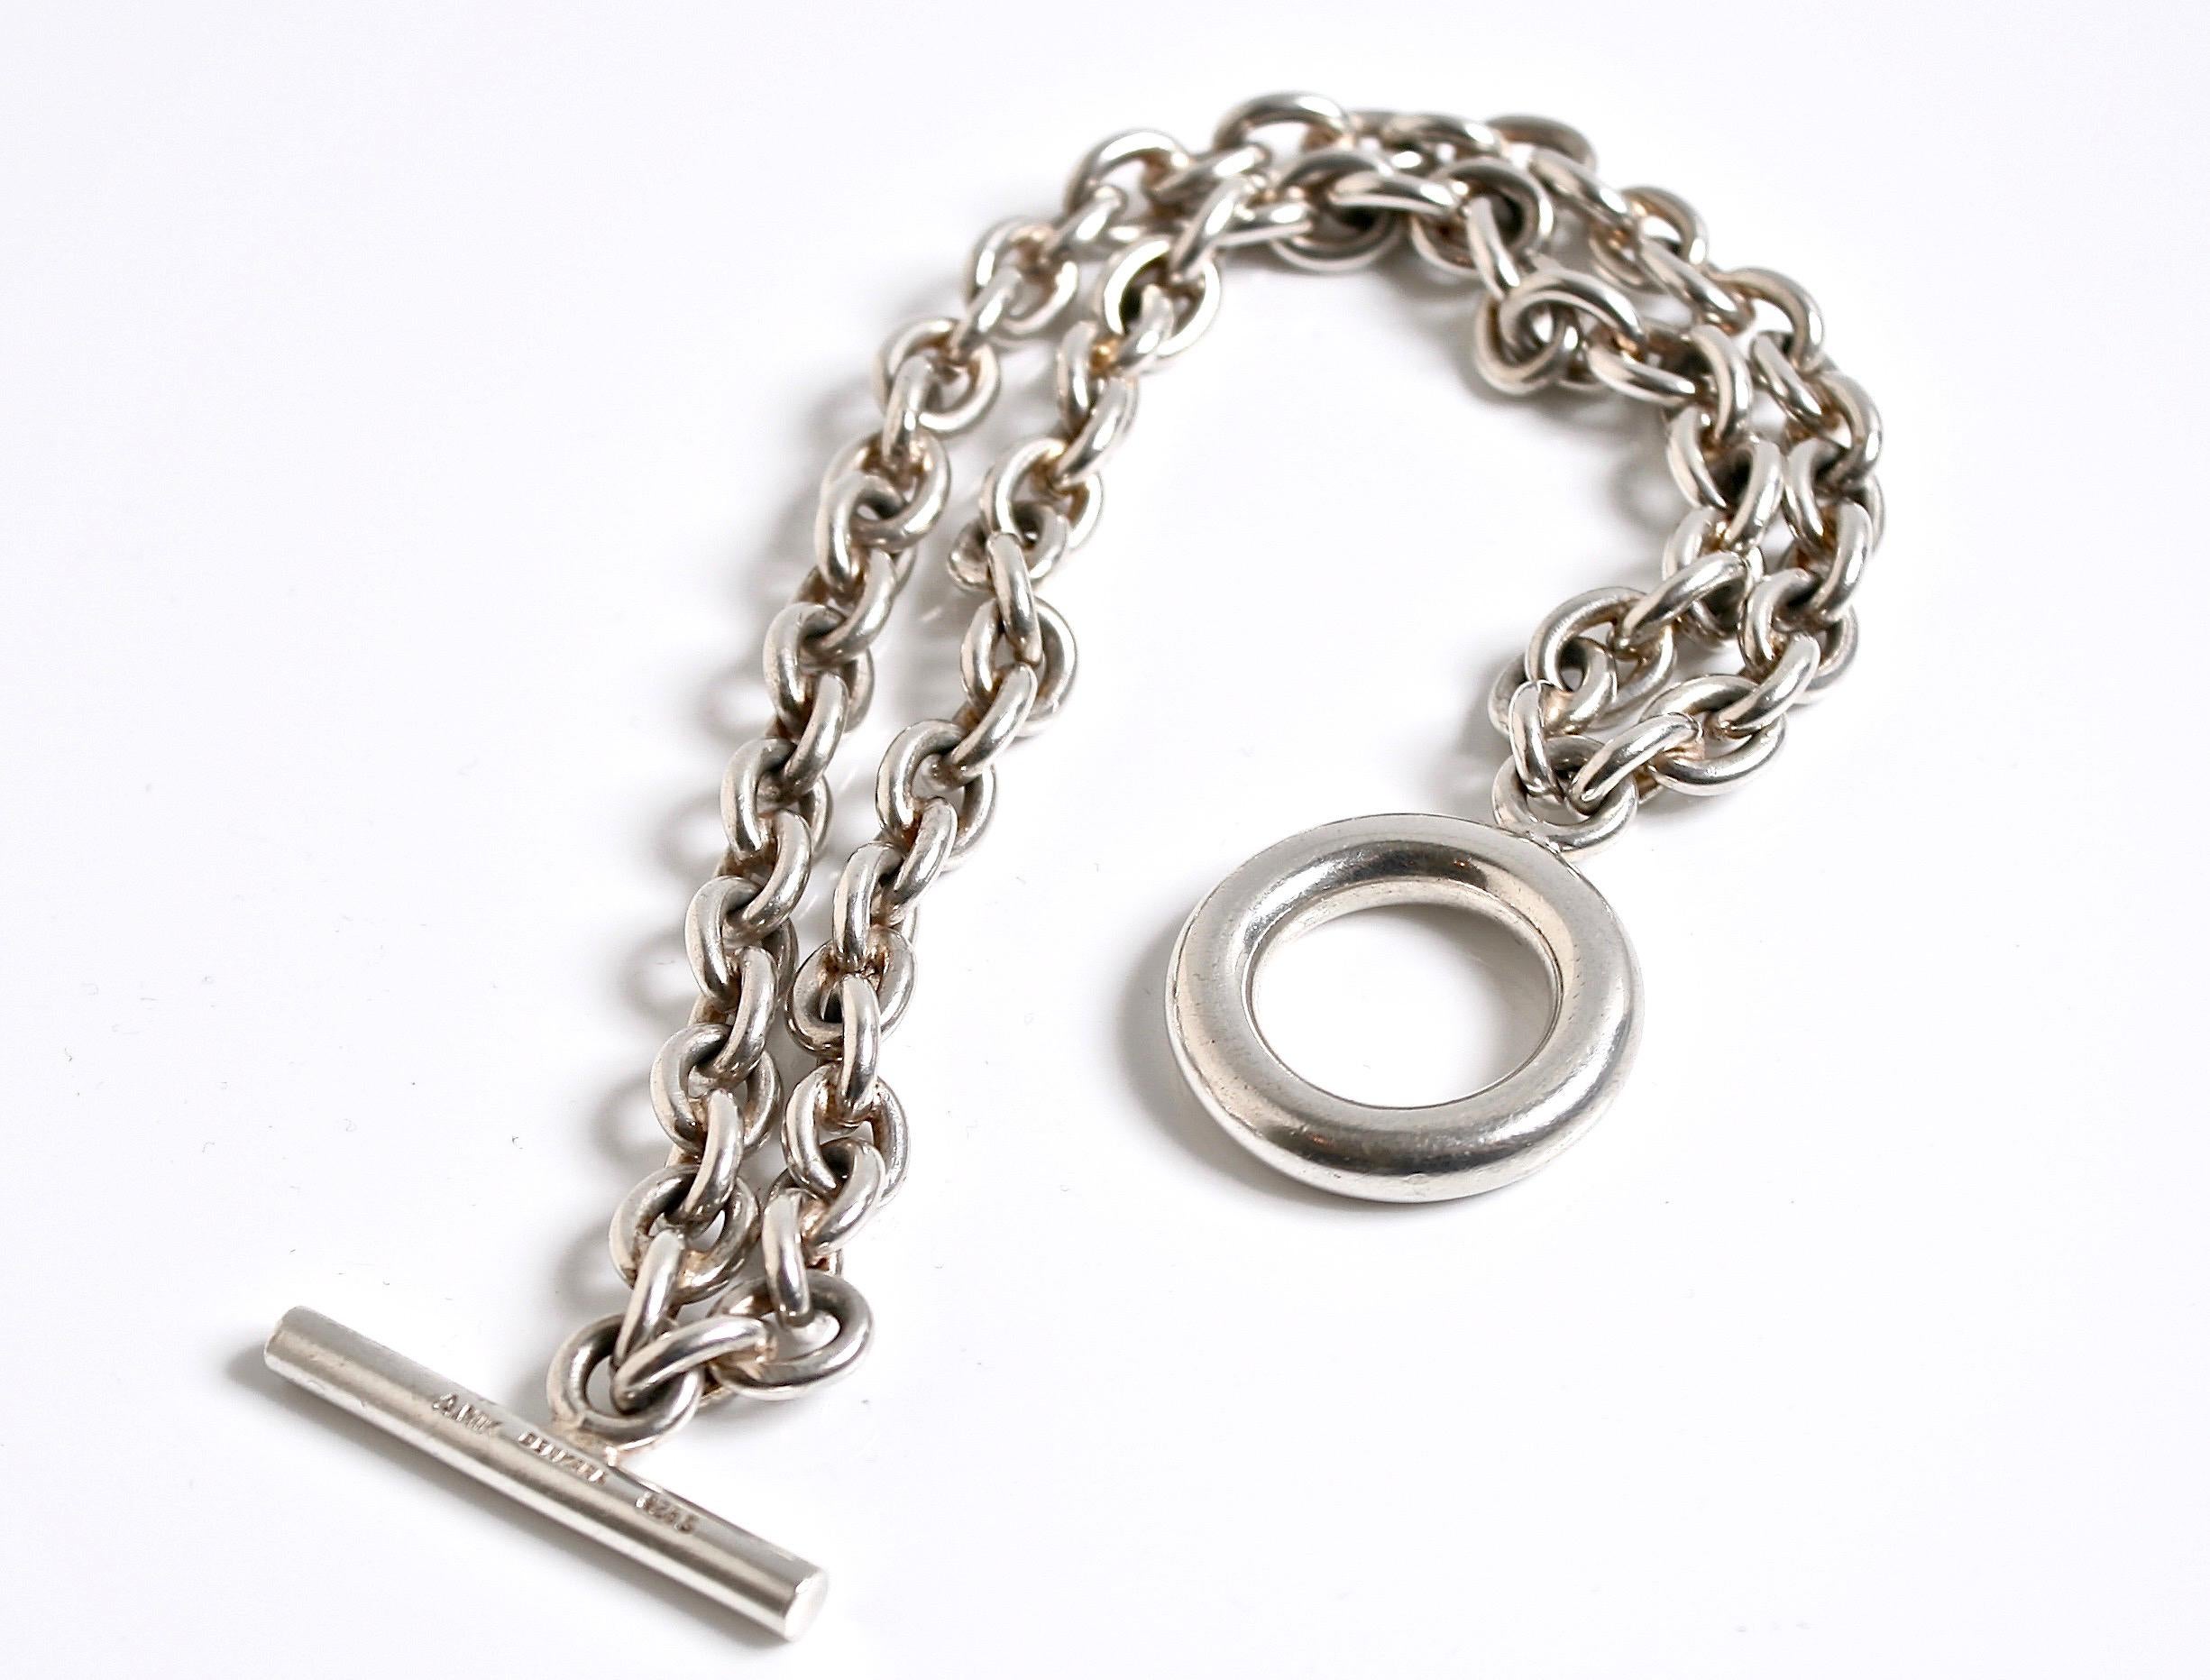 Sterling Silver Double Chain Link Toggle bracelet designed by Andreas Mikkelsen Denmark c.1970 Signed A MIK Denmark . A very heavy wearable link chain bracelet